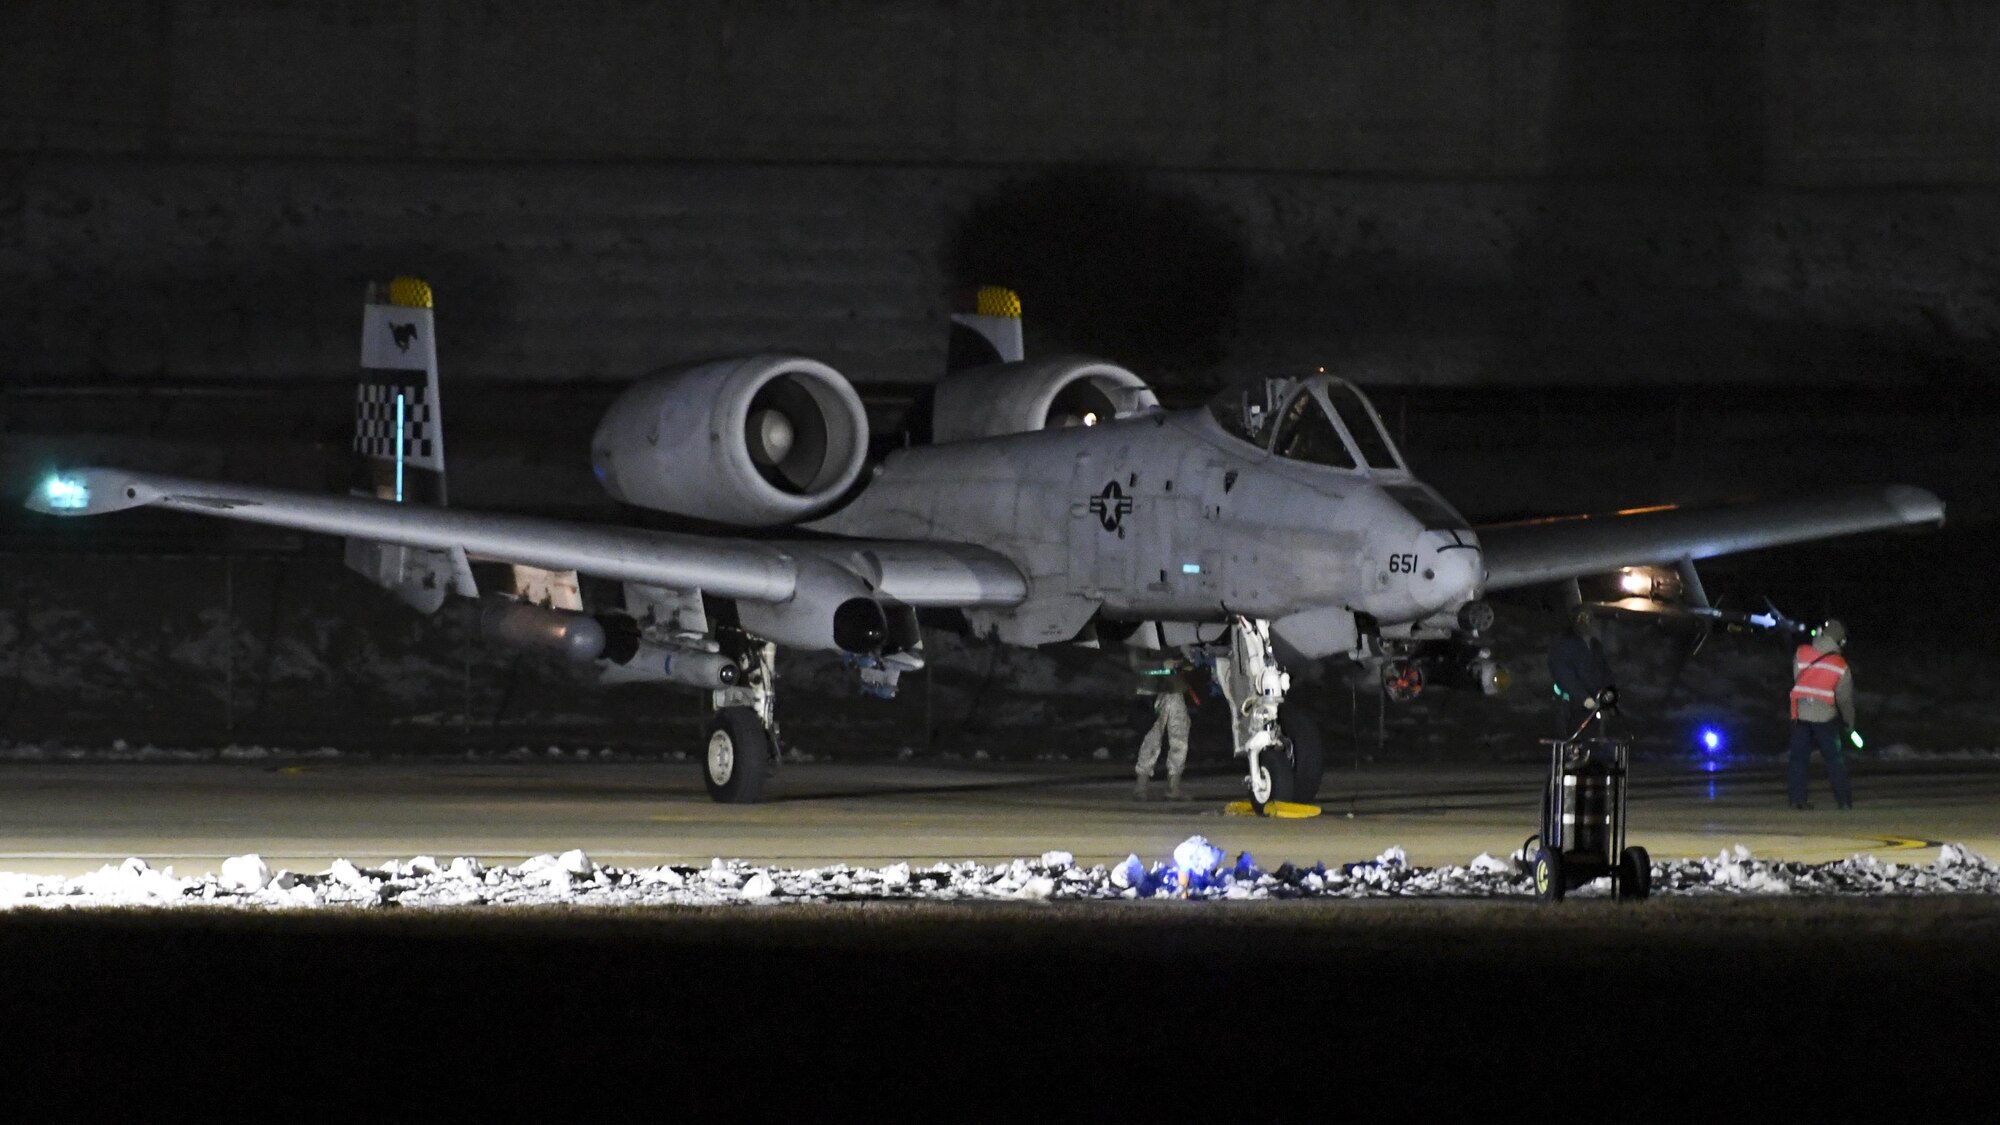 An A-10 Thunderbolt II assigned to the 25th Fighter Squadron is run through a final check before takeoff at Osan Air Base, Republic of Korea, Jan. 25, 2017. Several A-10s were flown in the mission, which was part of Exercise Pacific Thunder 17-1 and also the first night mission in the history of the exercise. (U.S. Air Force photo by Senior Airman Victor J. Caputo)